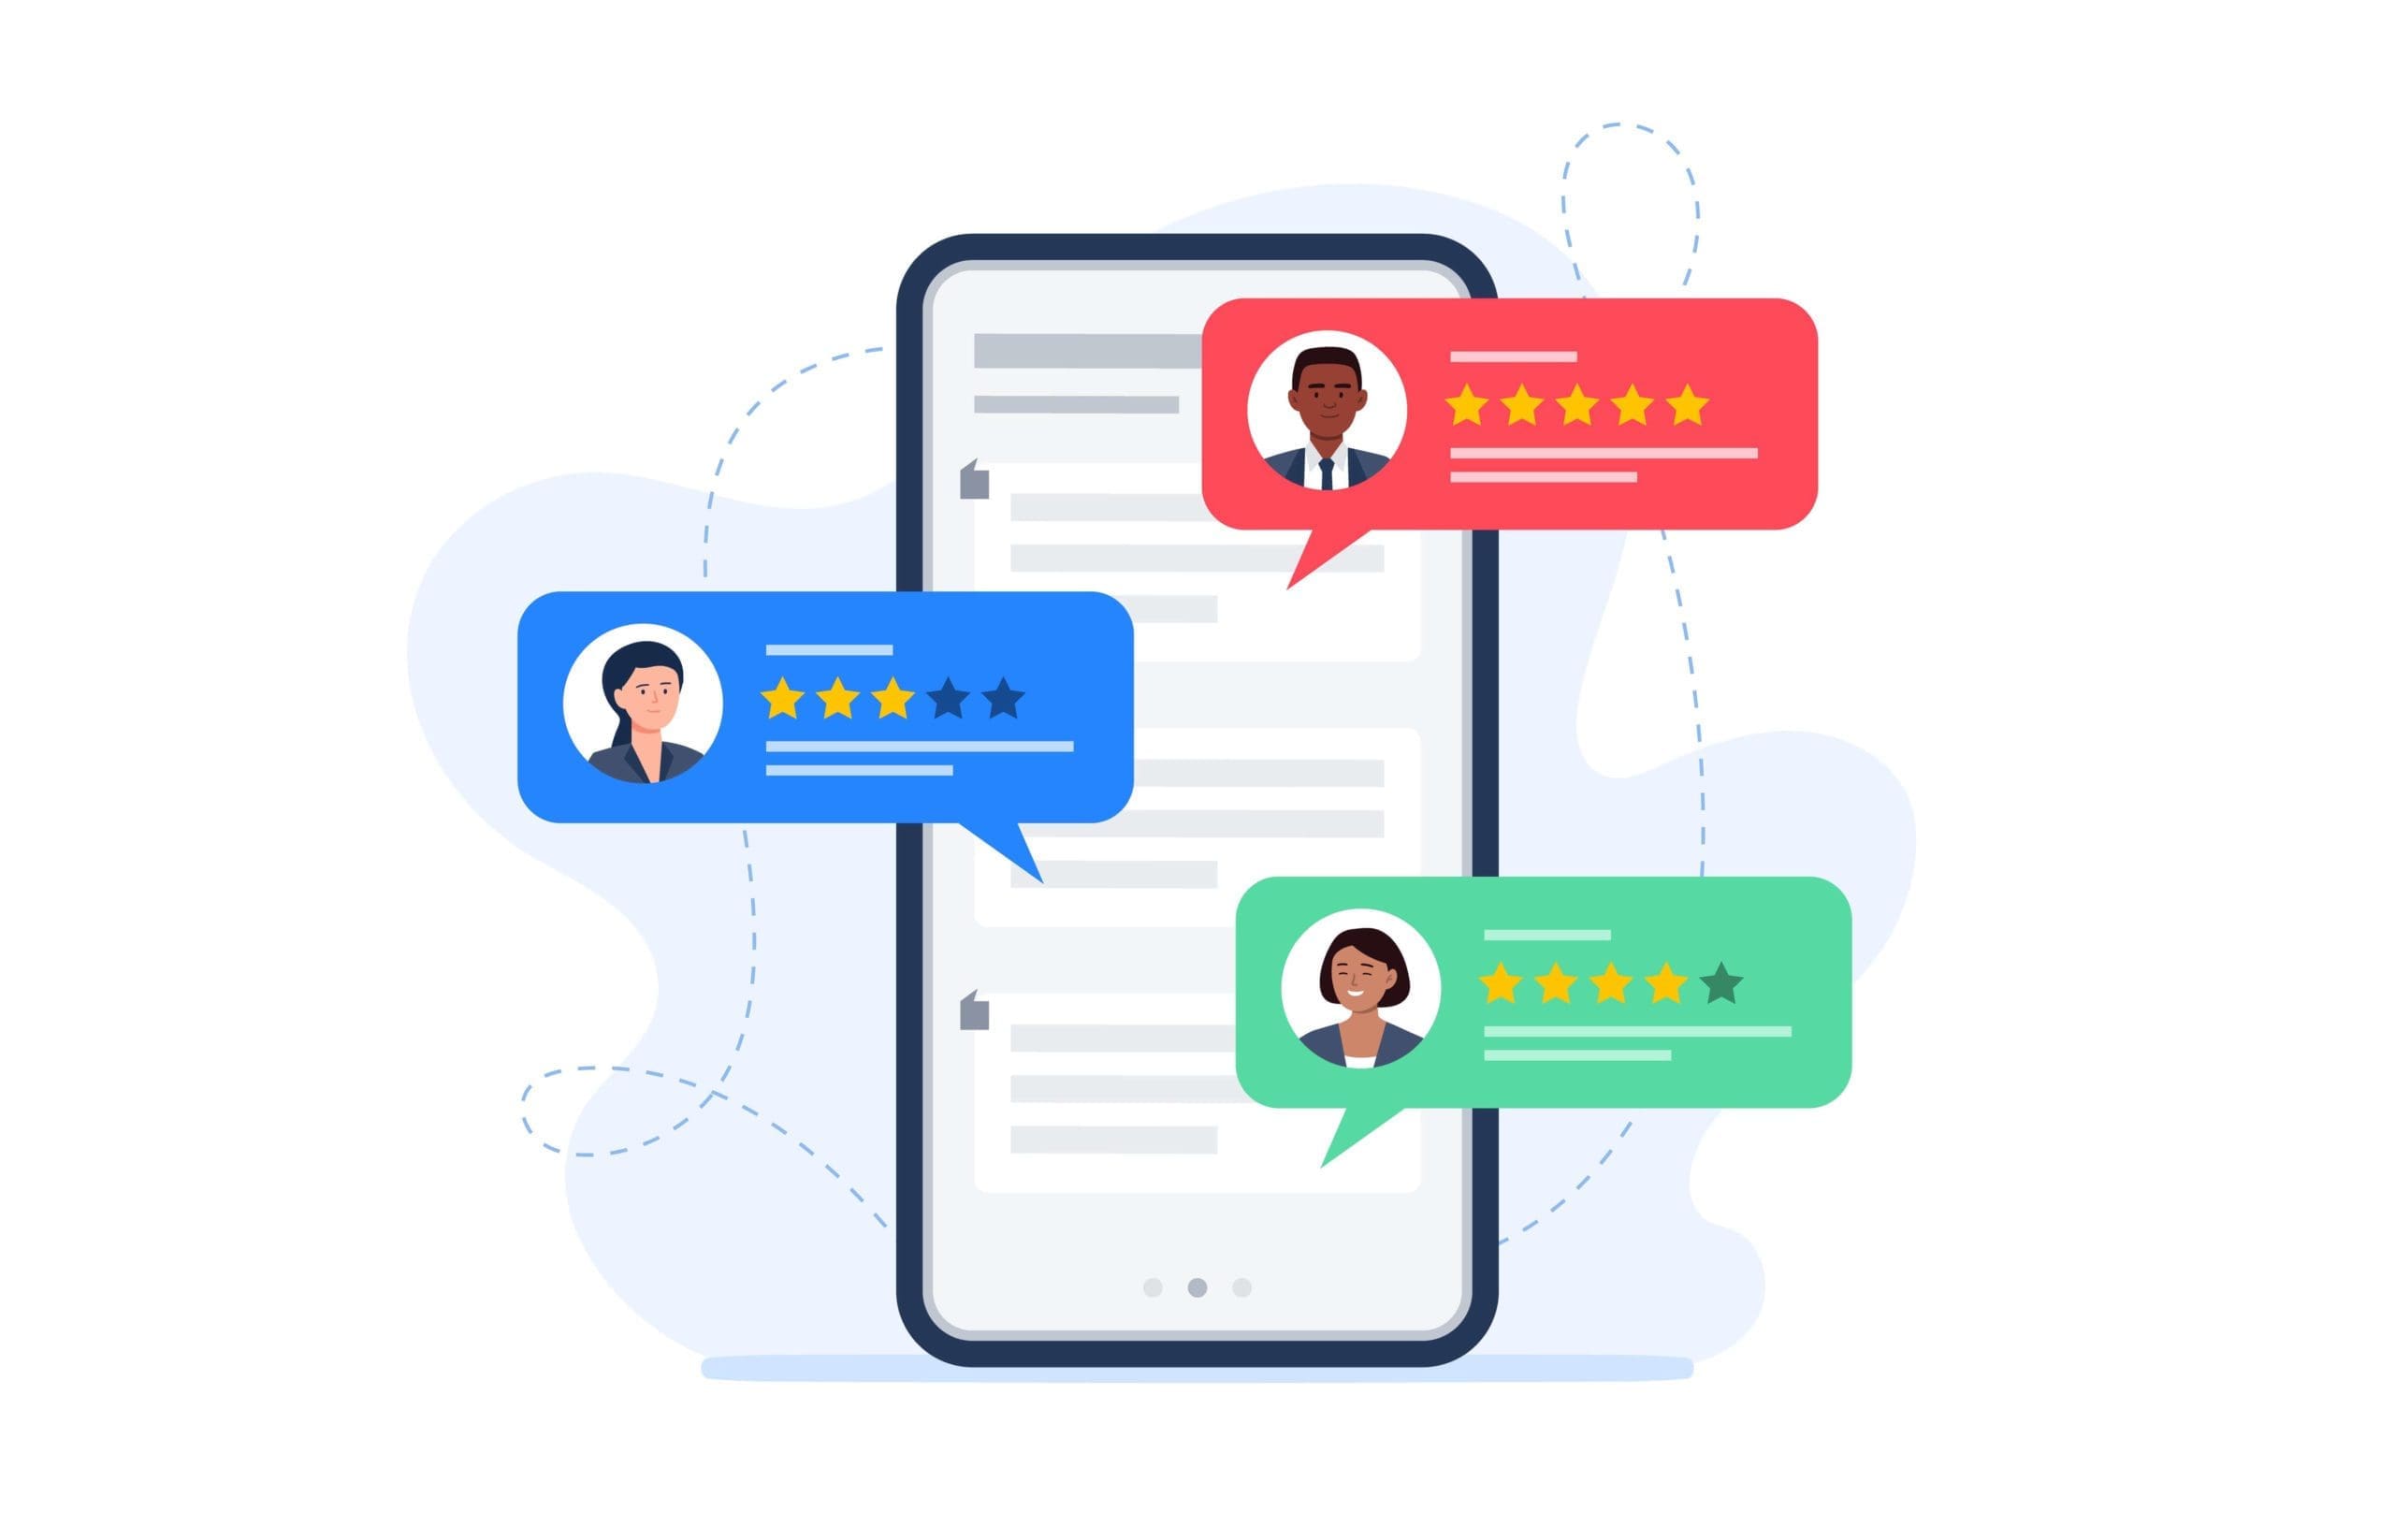 customer reviews - beating competition with competitive analysis